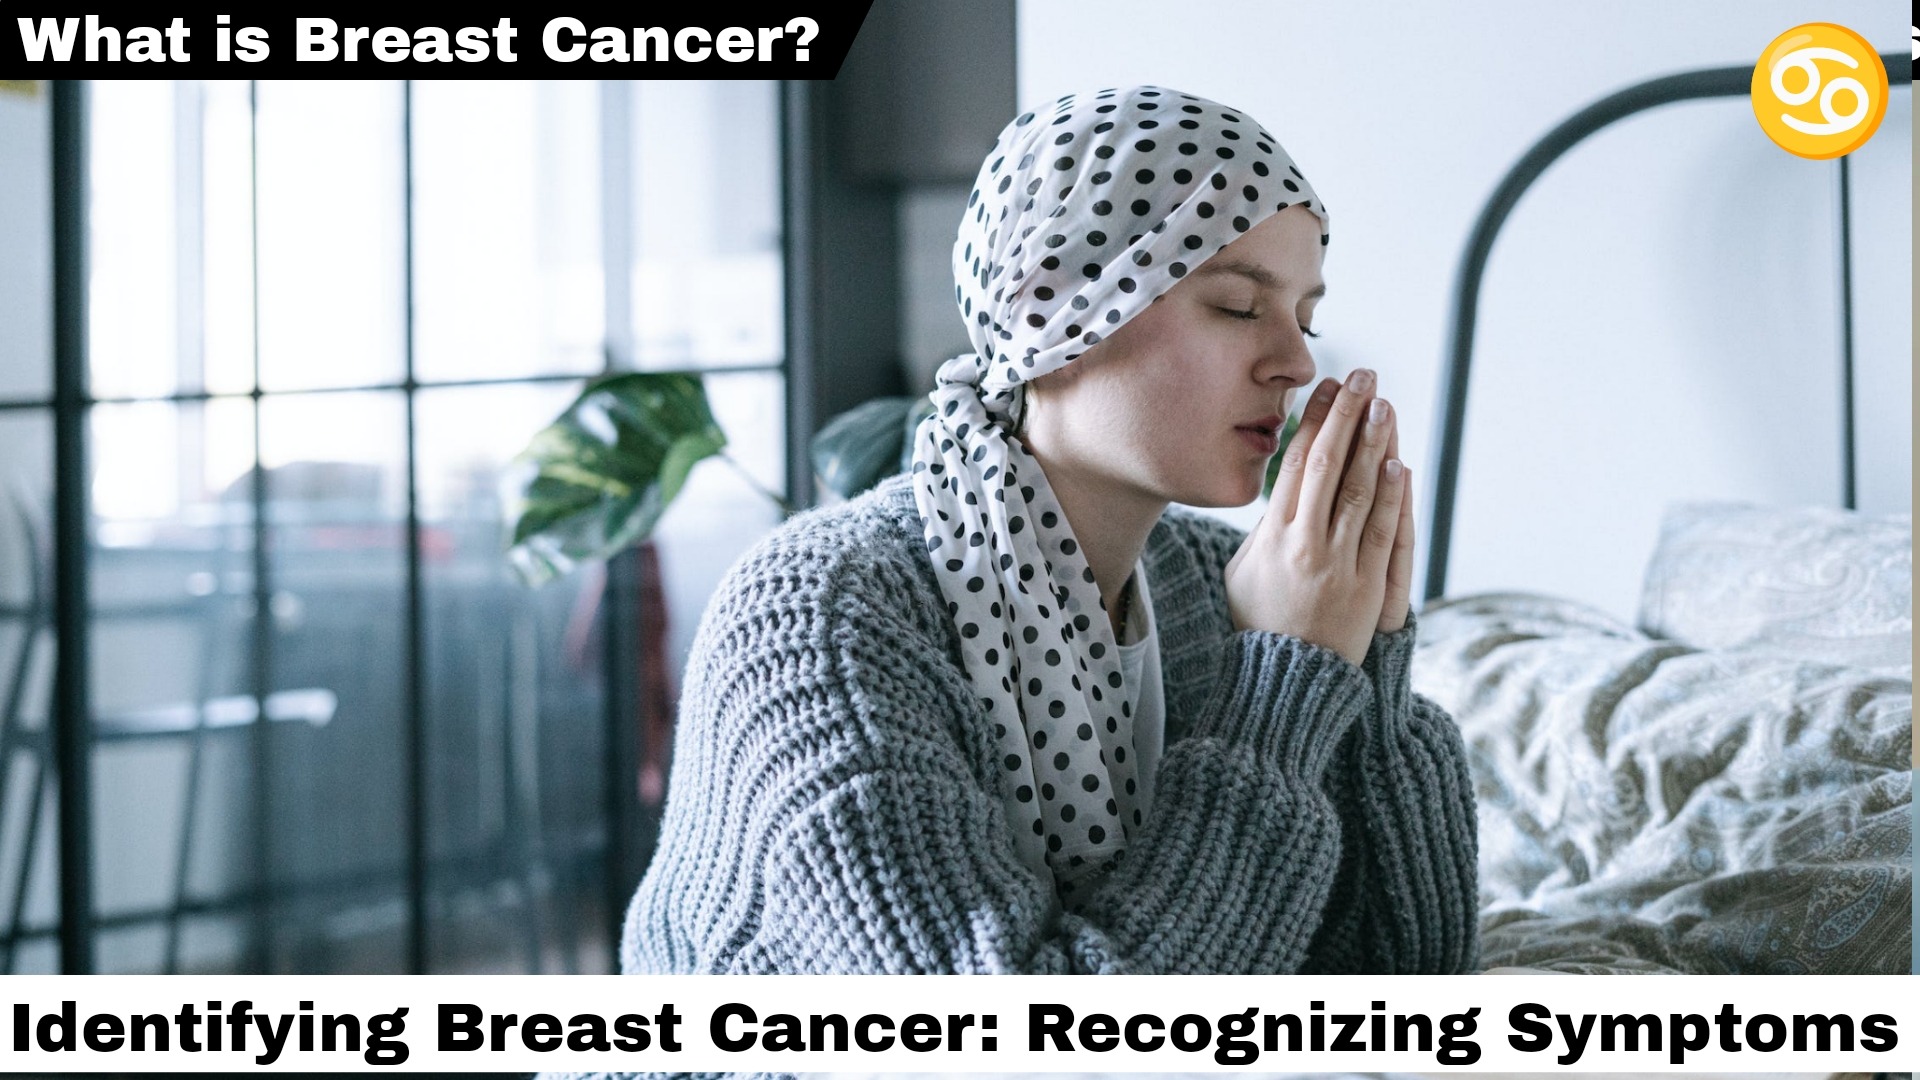 Identifying Breast Cancer: Recognizing Symptoms